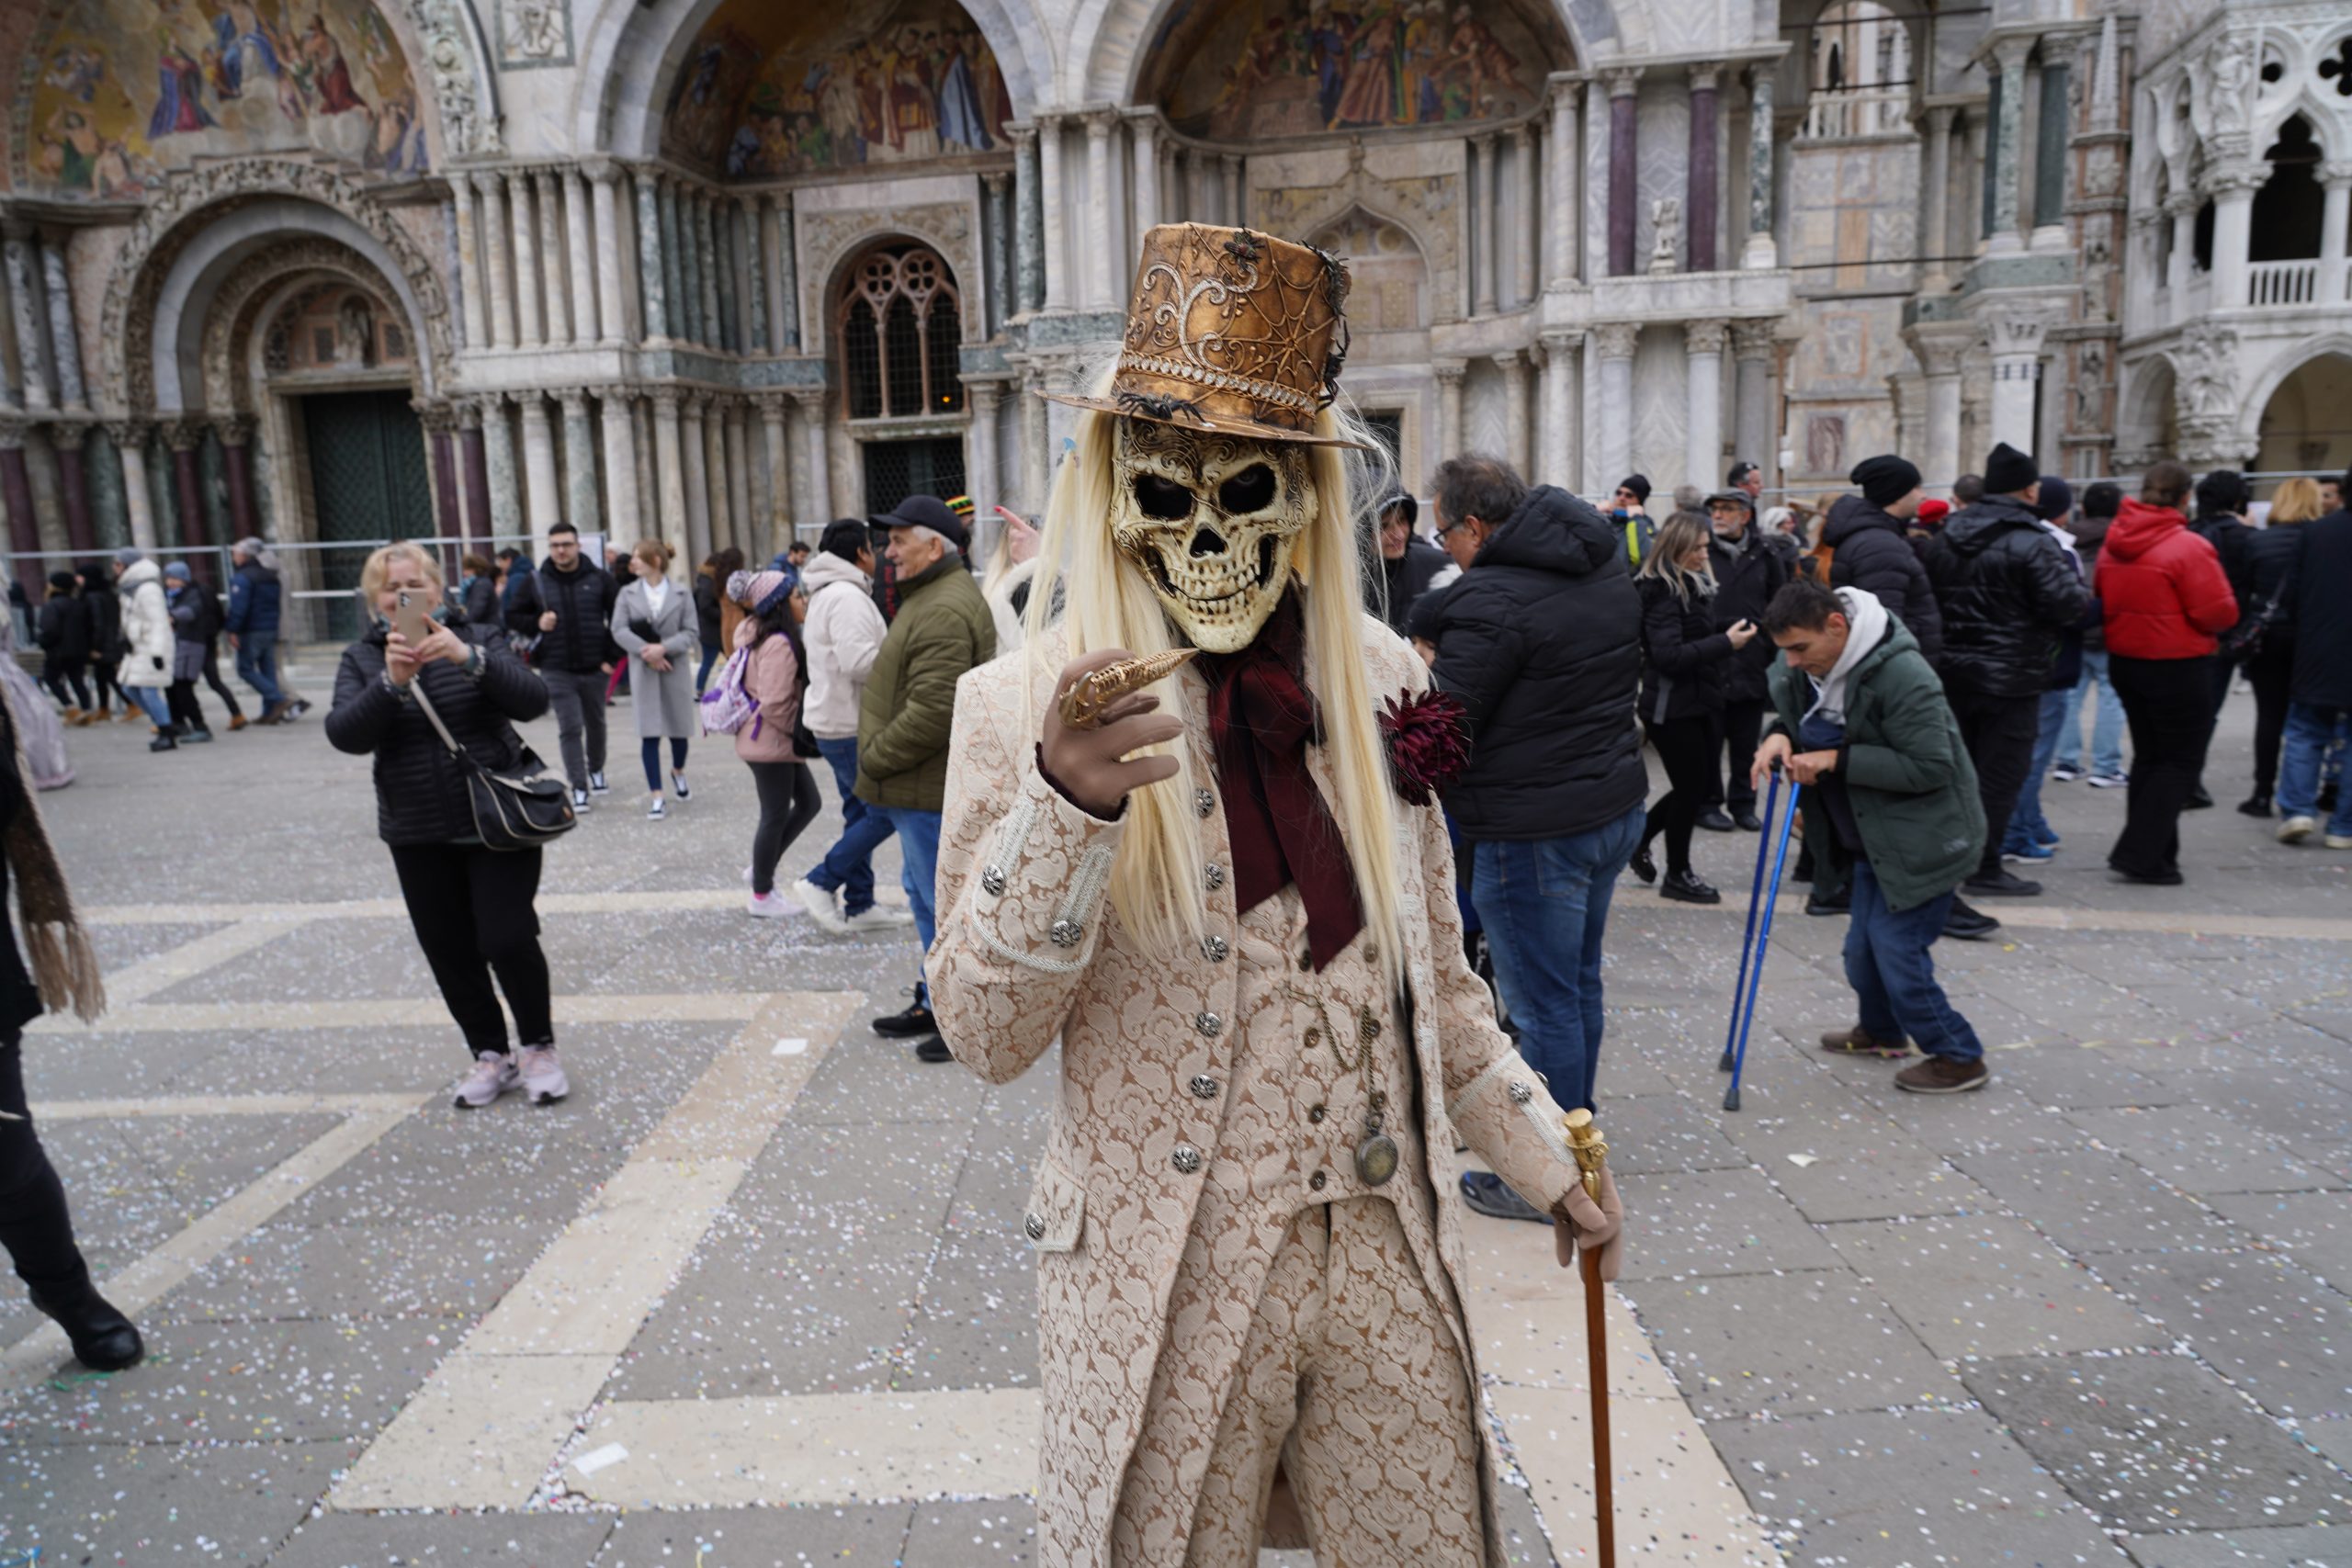 Not sure how to describe this at The Carnival of Venice 